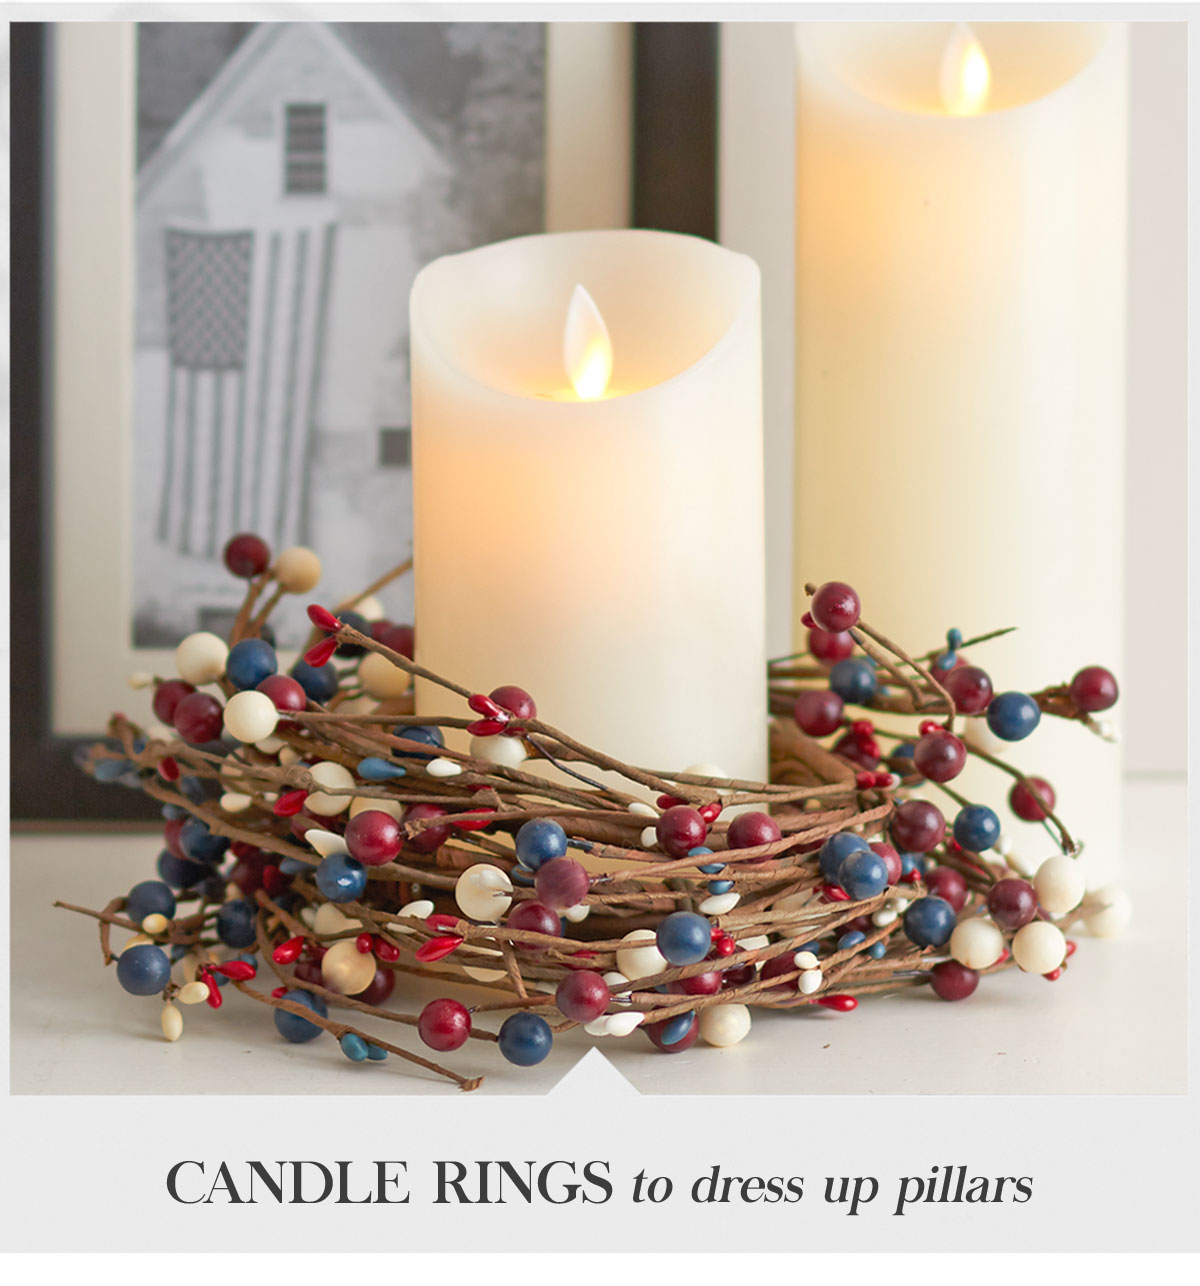 Candle Rings to dress up pillars